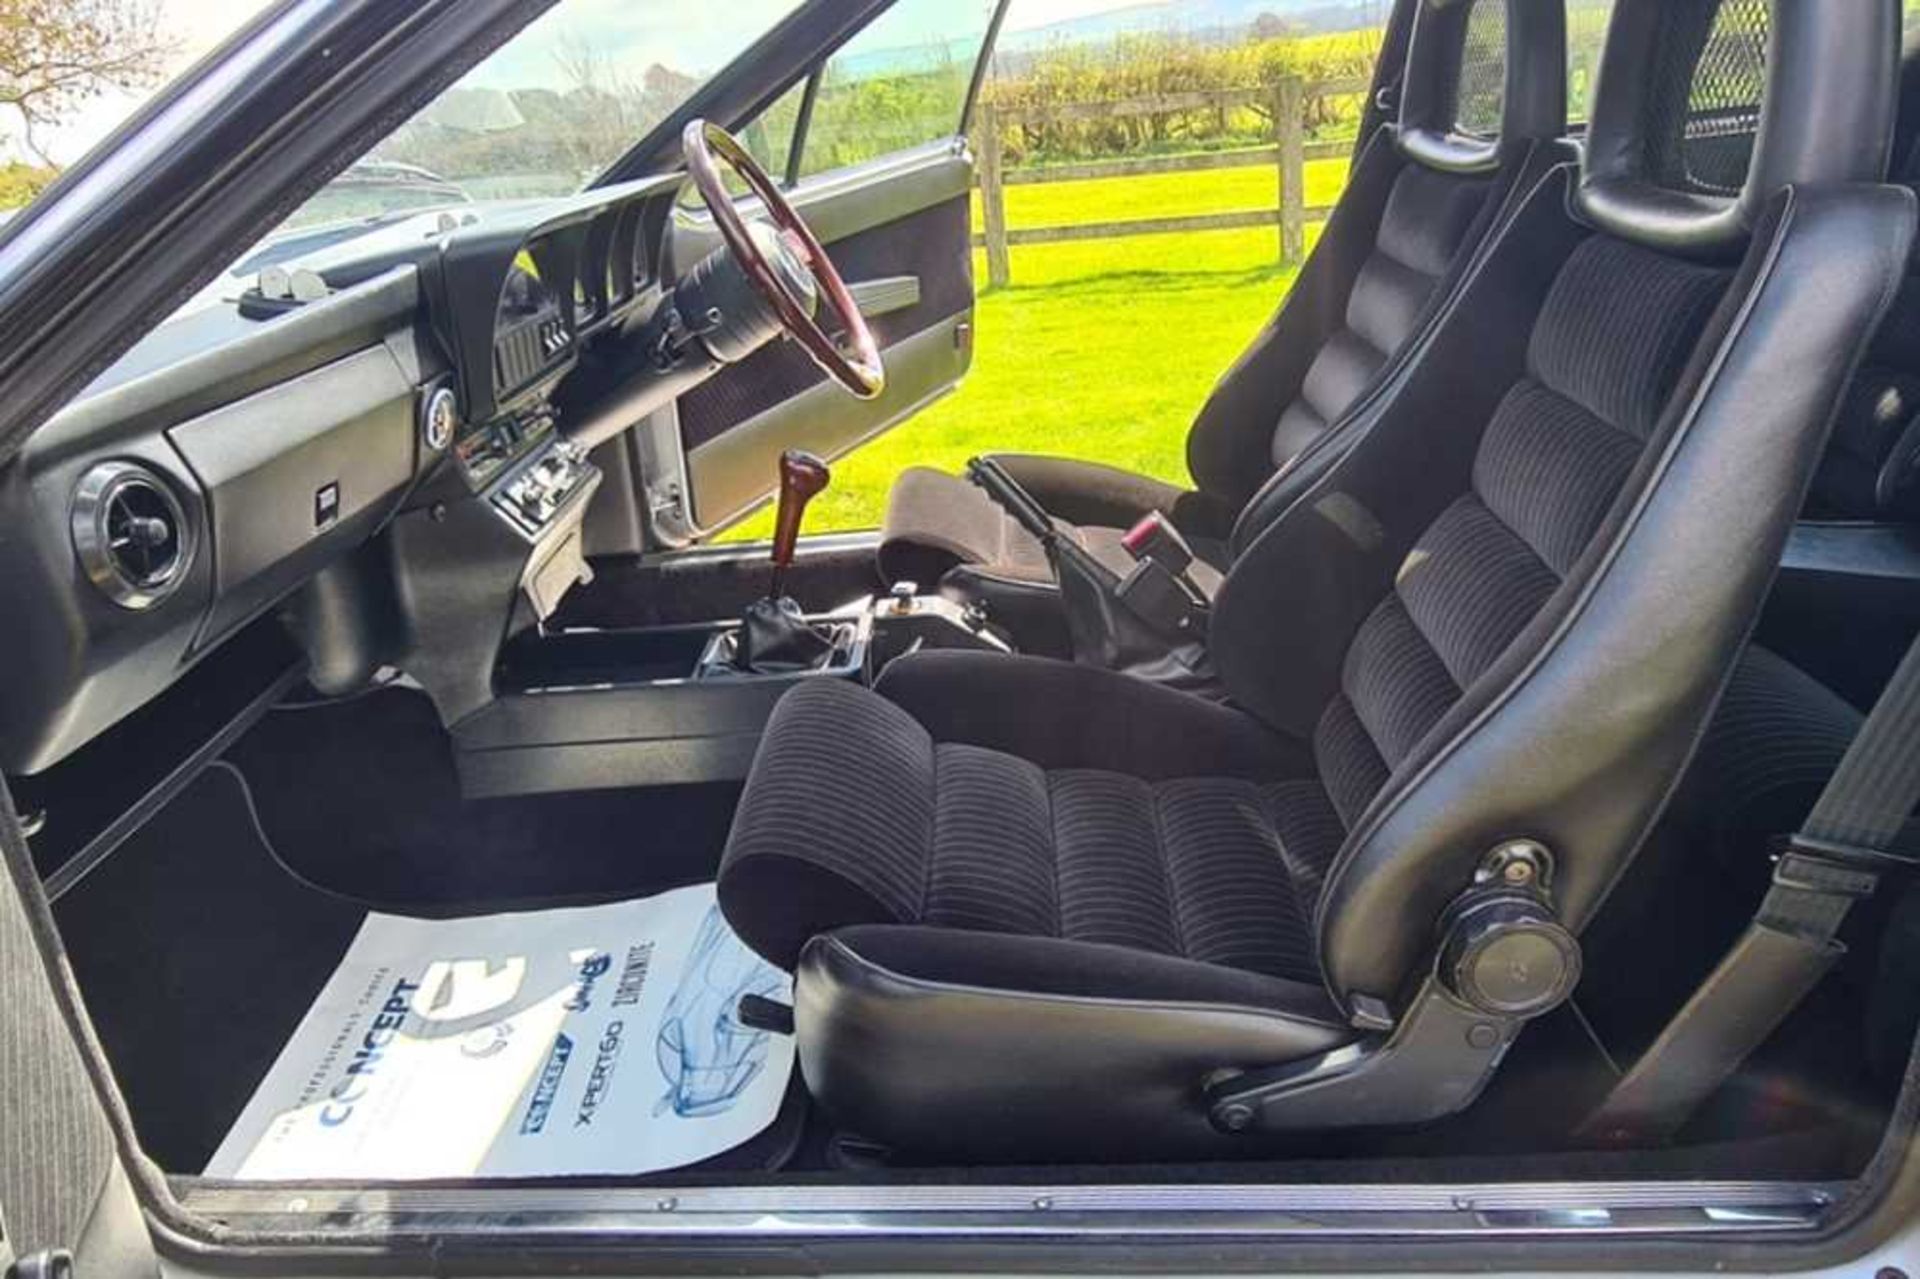 1983 Alfa Romeo GTV 2.0 litre Single family ownership and 48,000 miles from new - Image 29 of 51